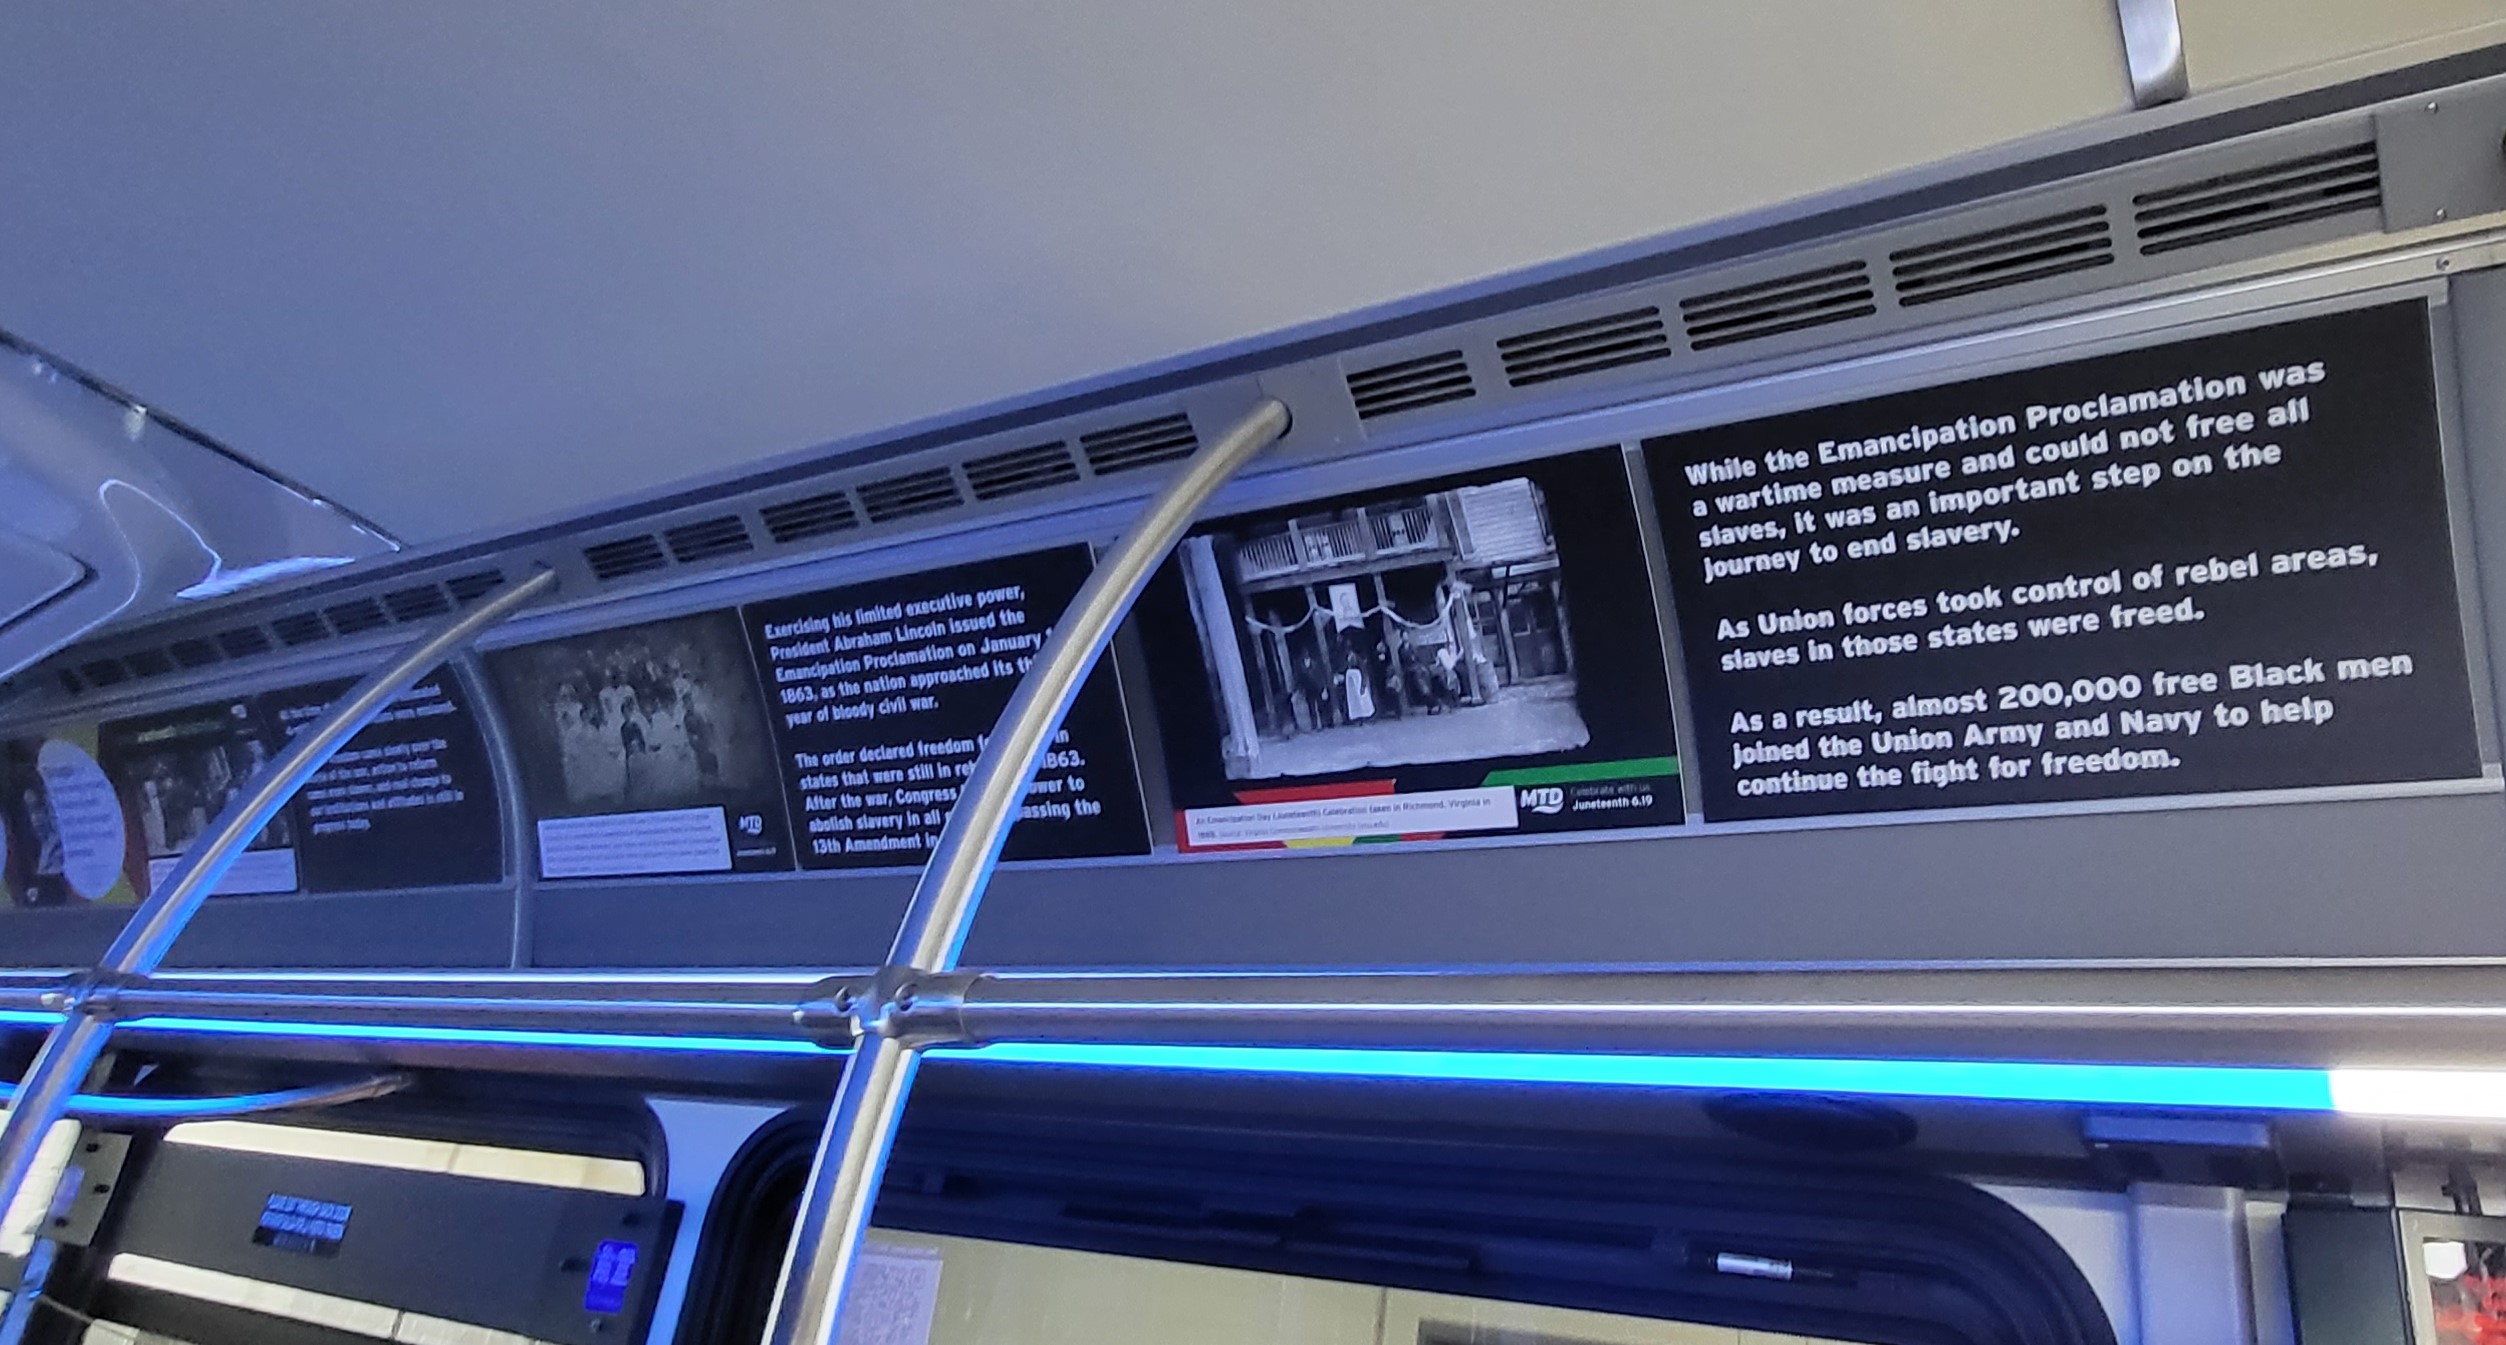 Several posters are shown inside the Juneteenth Bus, which is a mobile history exhibit to teach about the history and significance ofof Juneteenth.